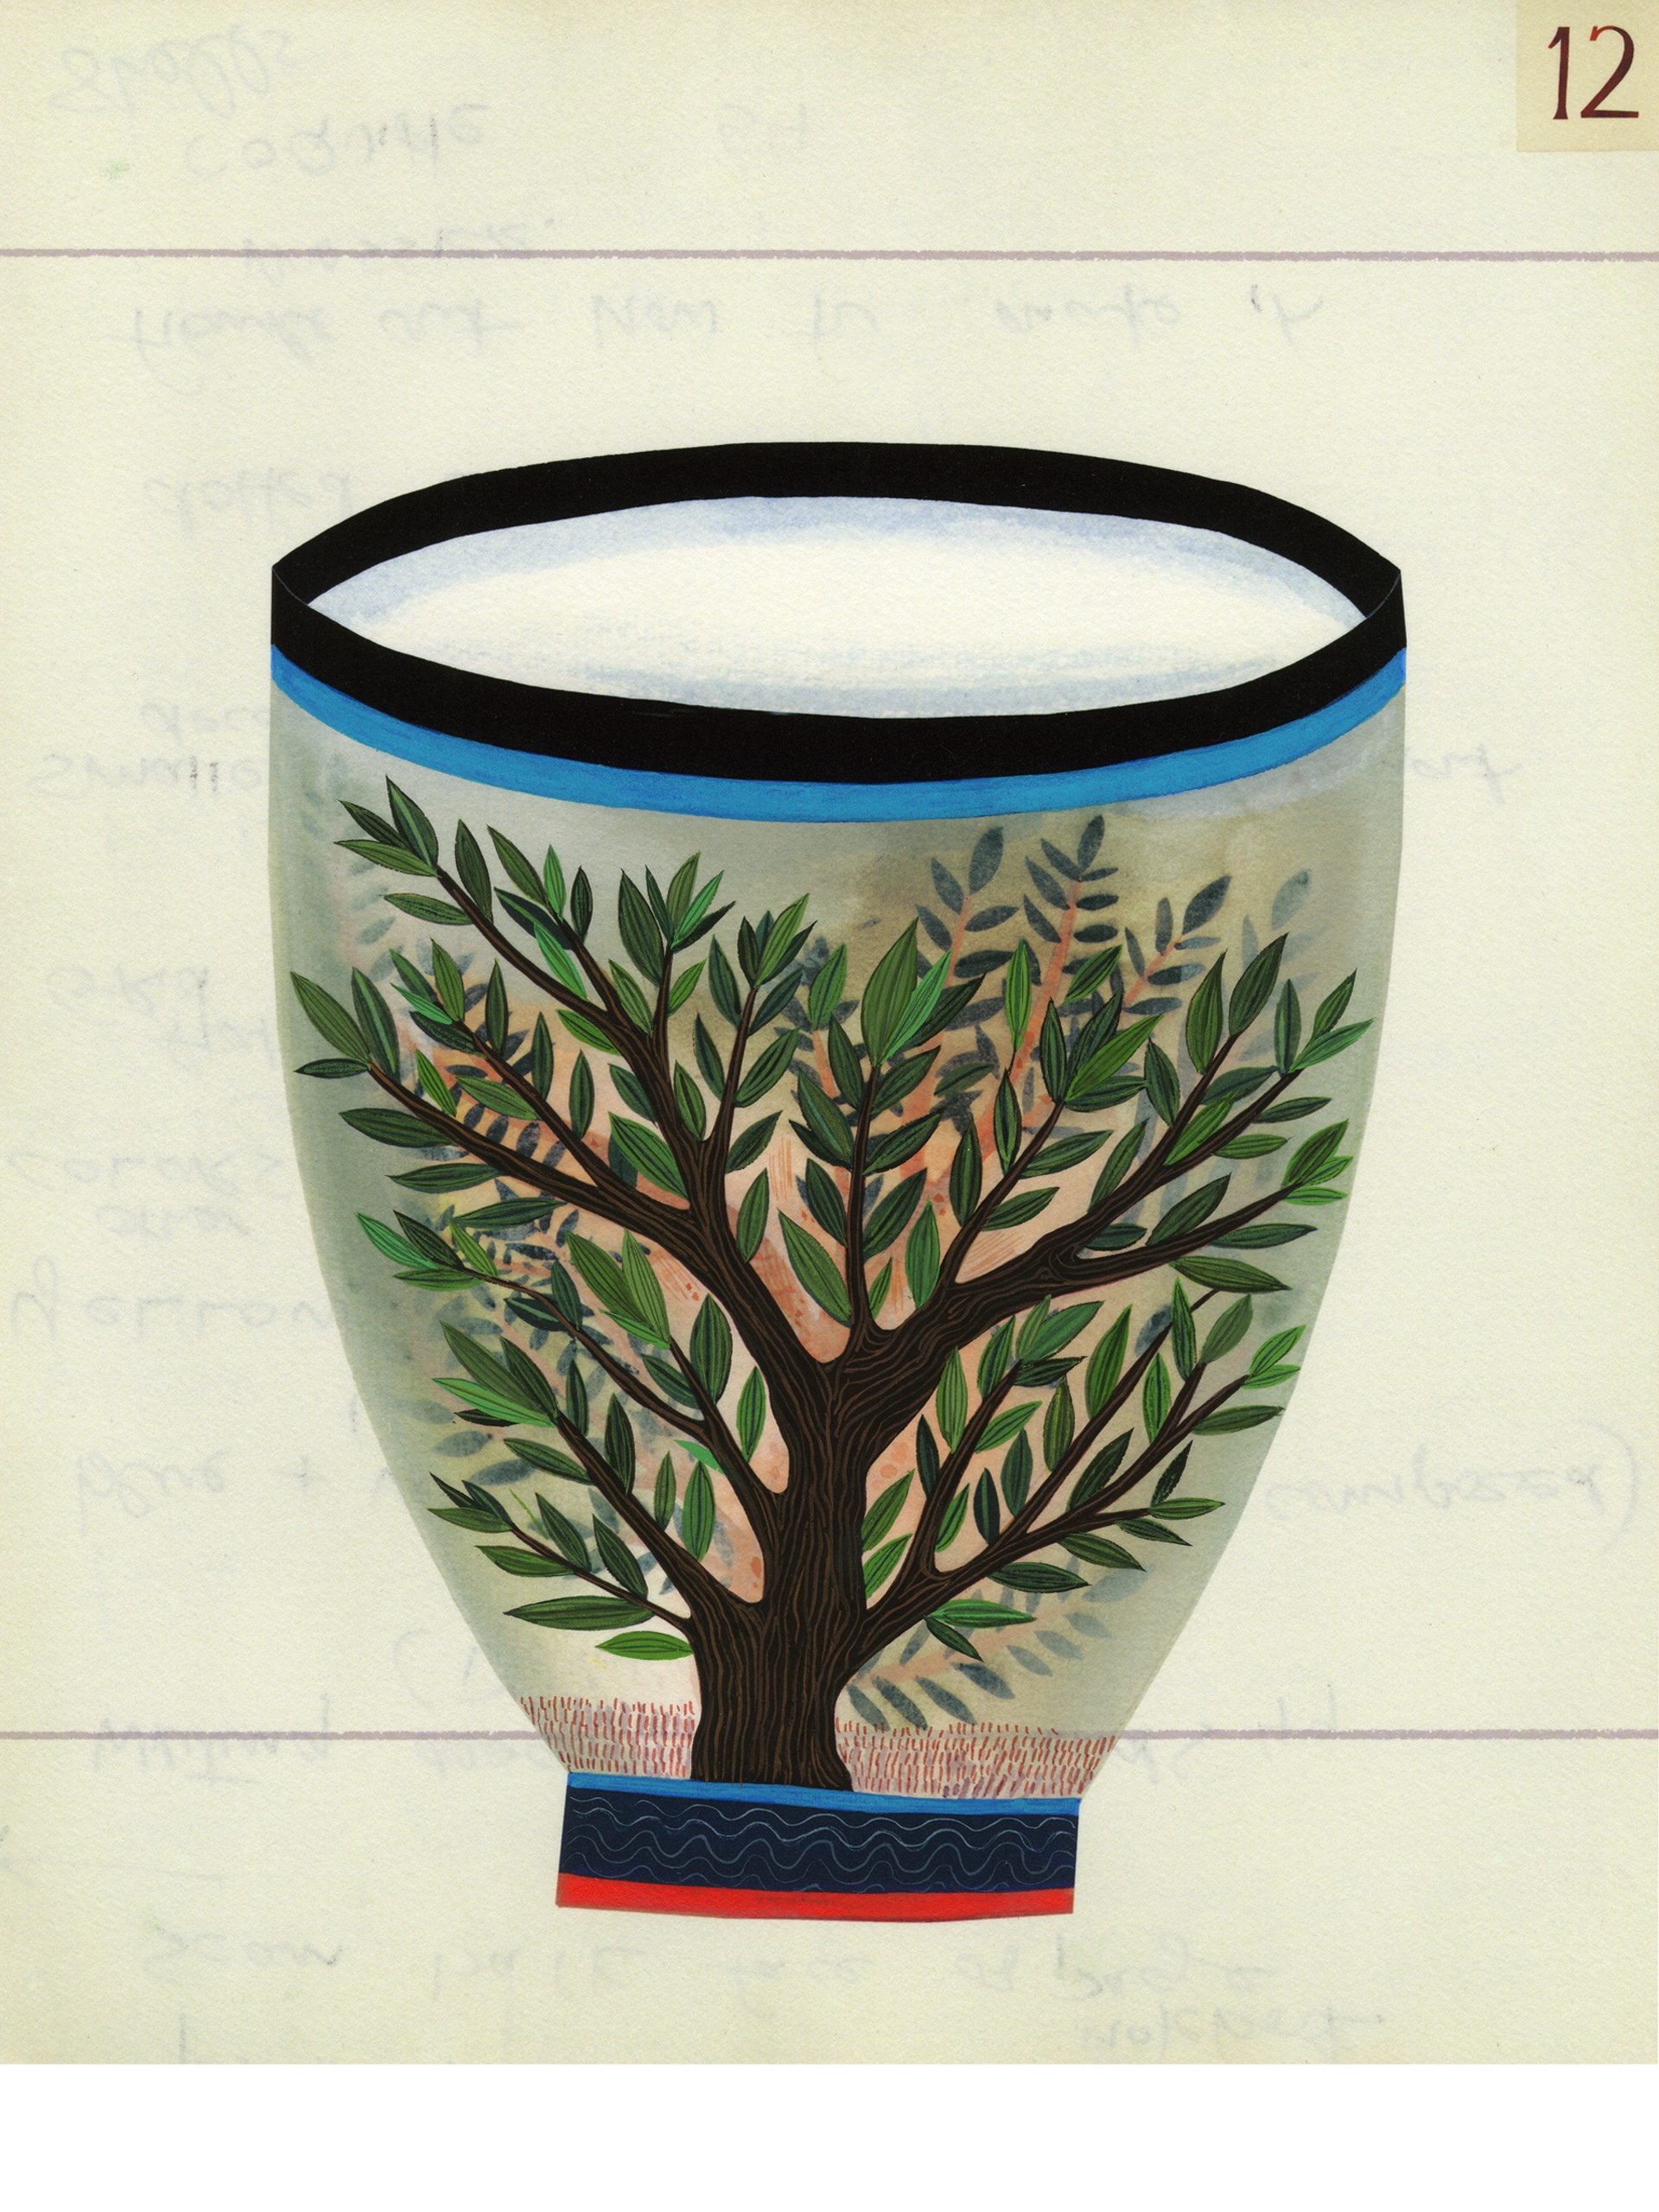 Cup No. 12 by Anne Smith